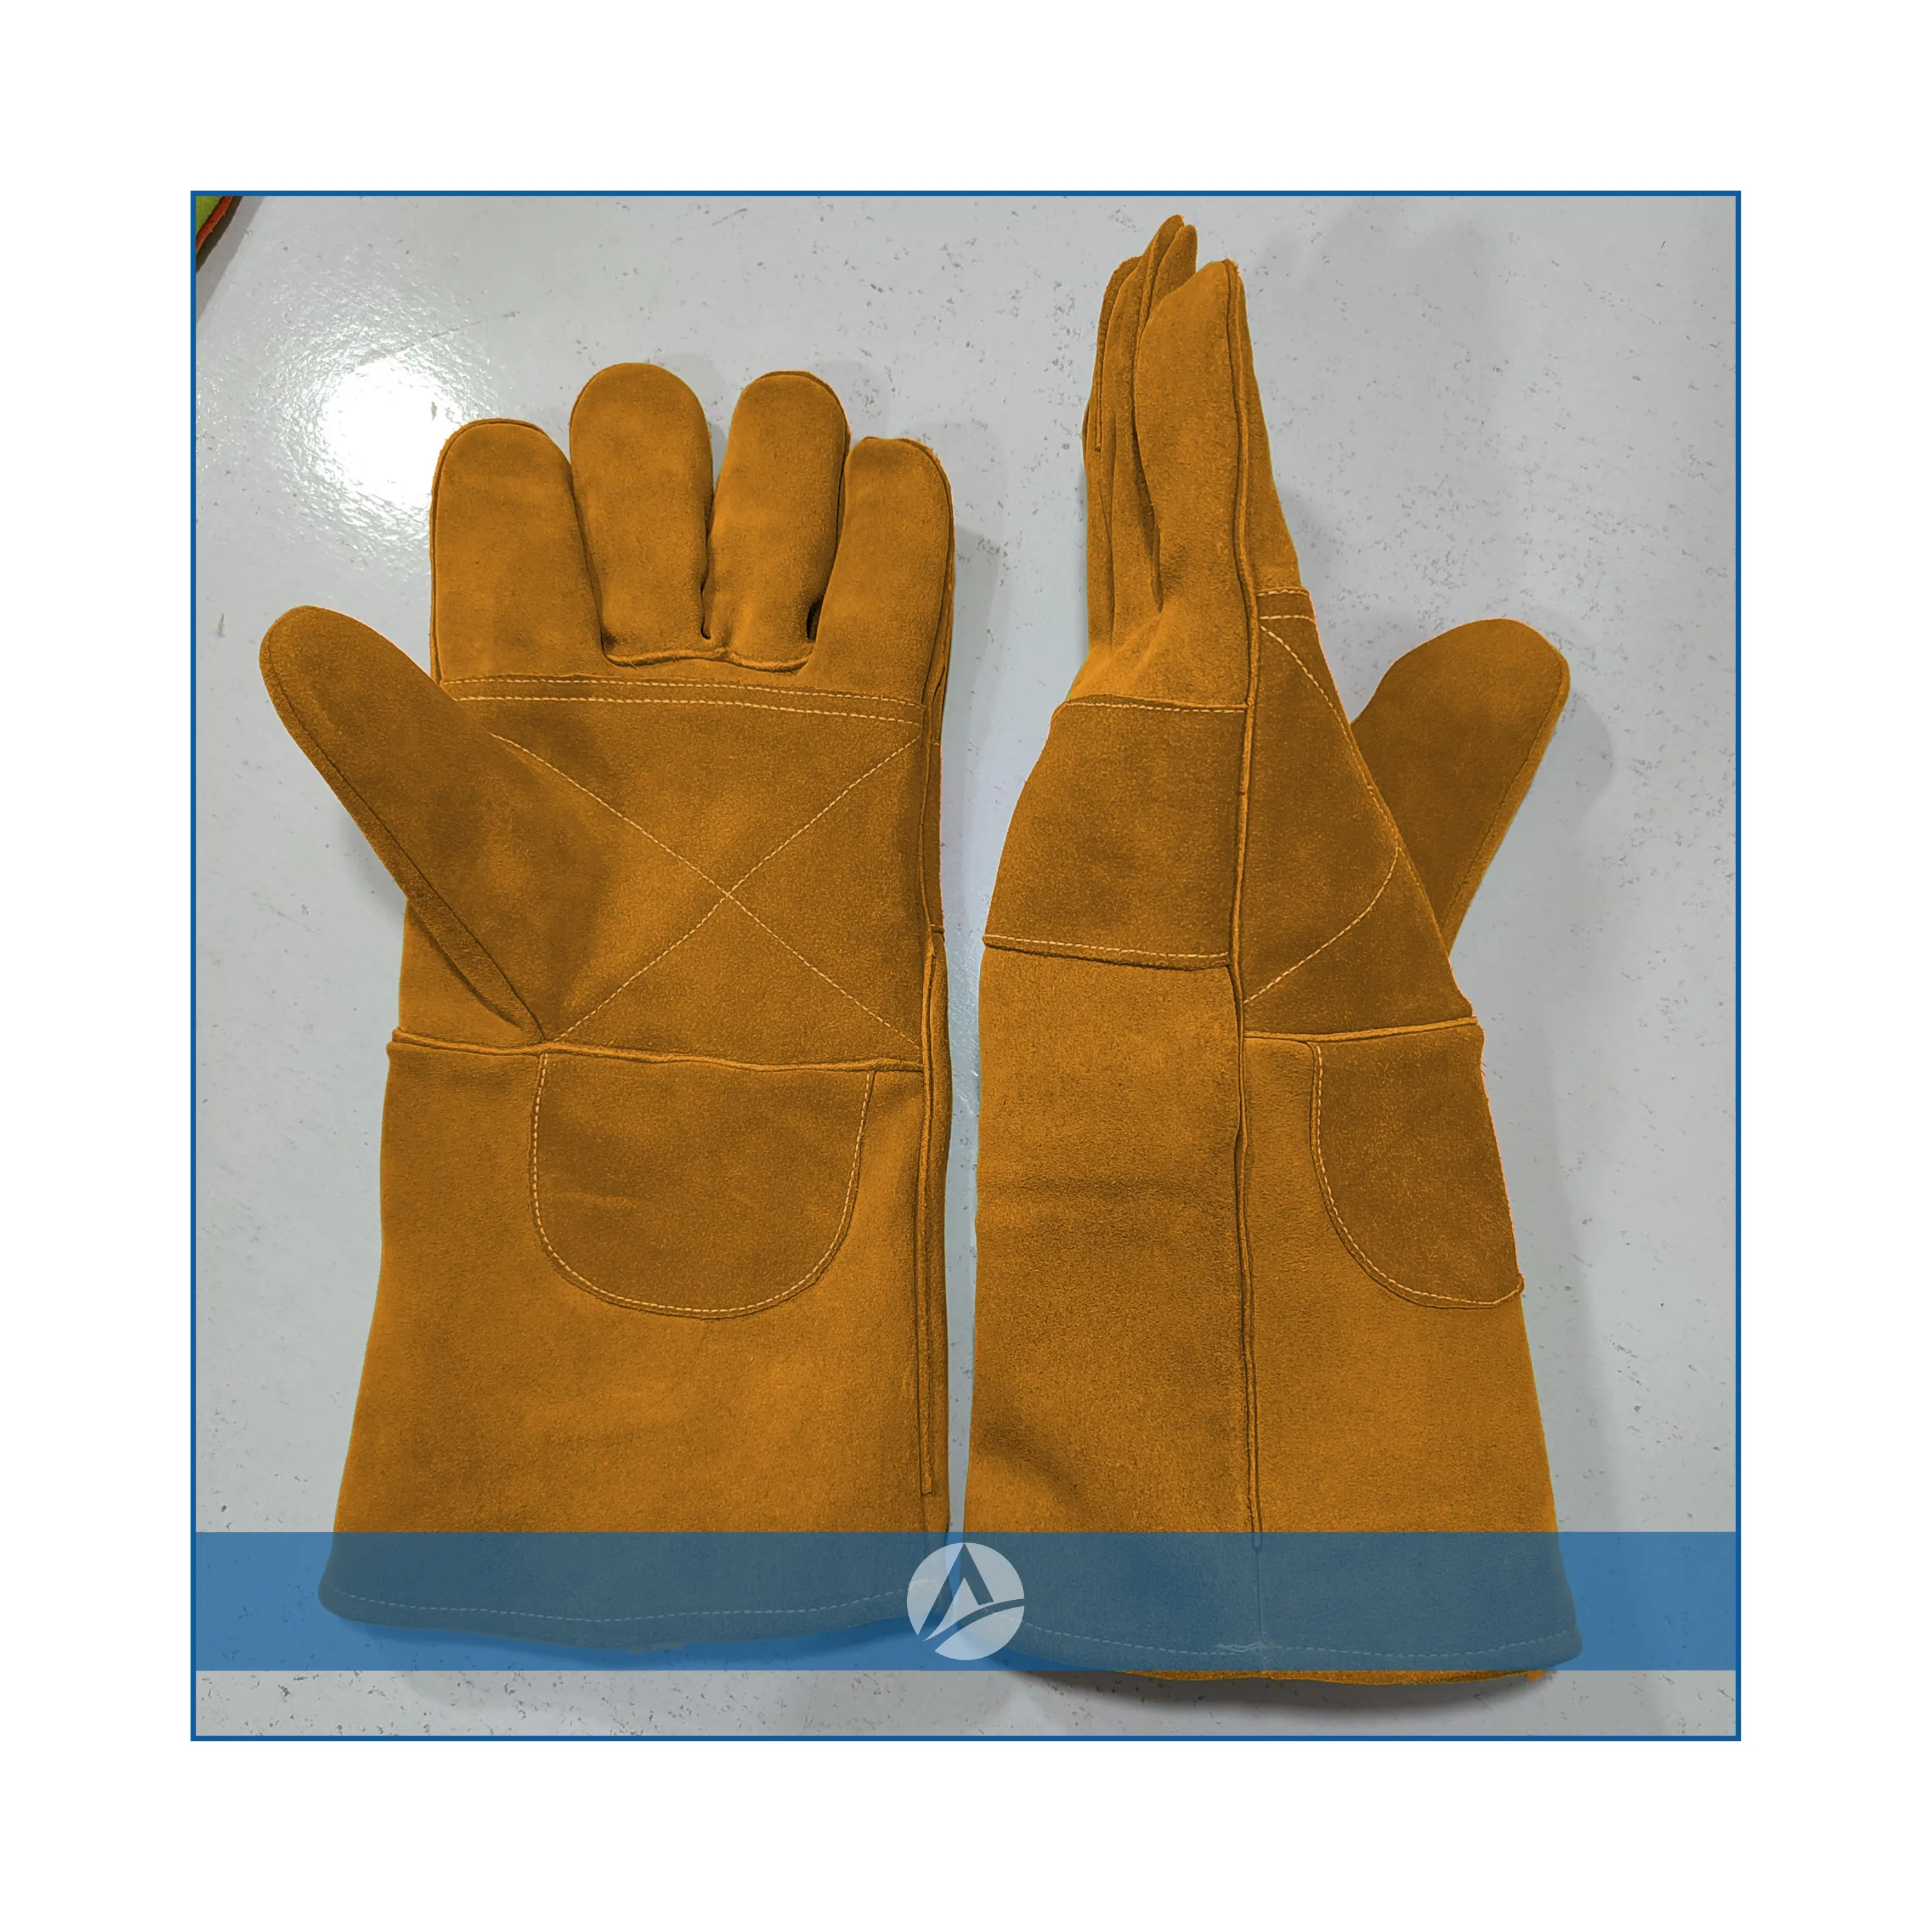 Non Slip Industrial Welding gloves For Welding Electrical Gloves Made of Real Leather Long Wrist Protection Welding gloves